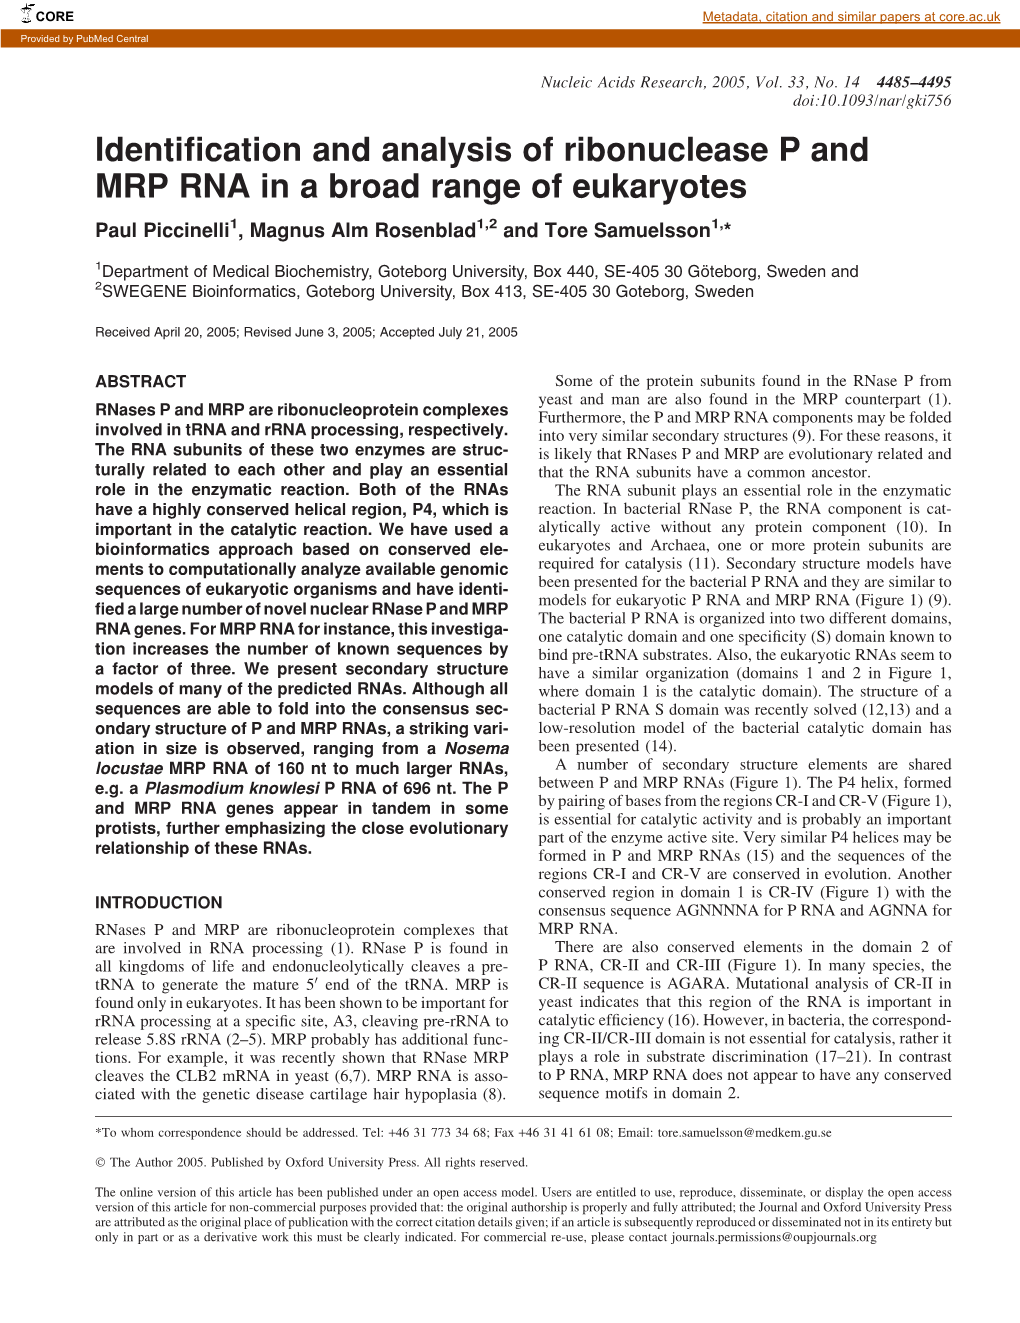 Identification and Analysis of Ribonuclease P and MRP RNA in a Broad Range of Eukaryotes Paul Piccinelli1, Magnus Alm Rosenblad1,2 and Tore Samuelsson1,*